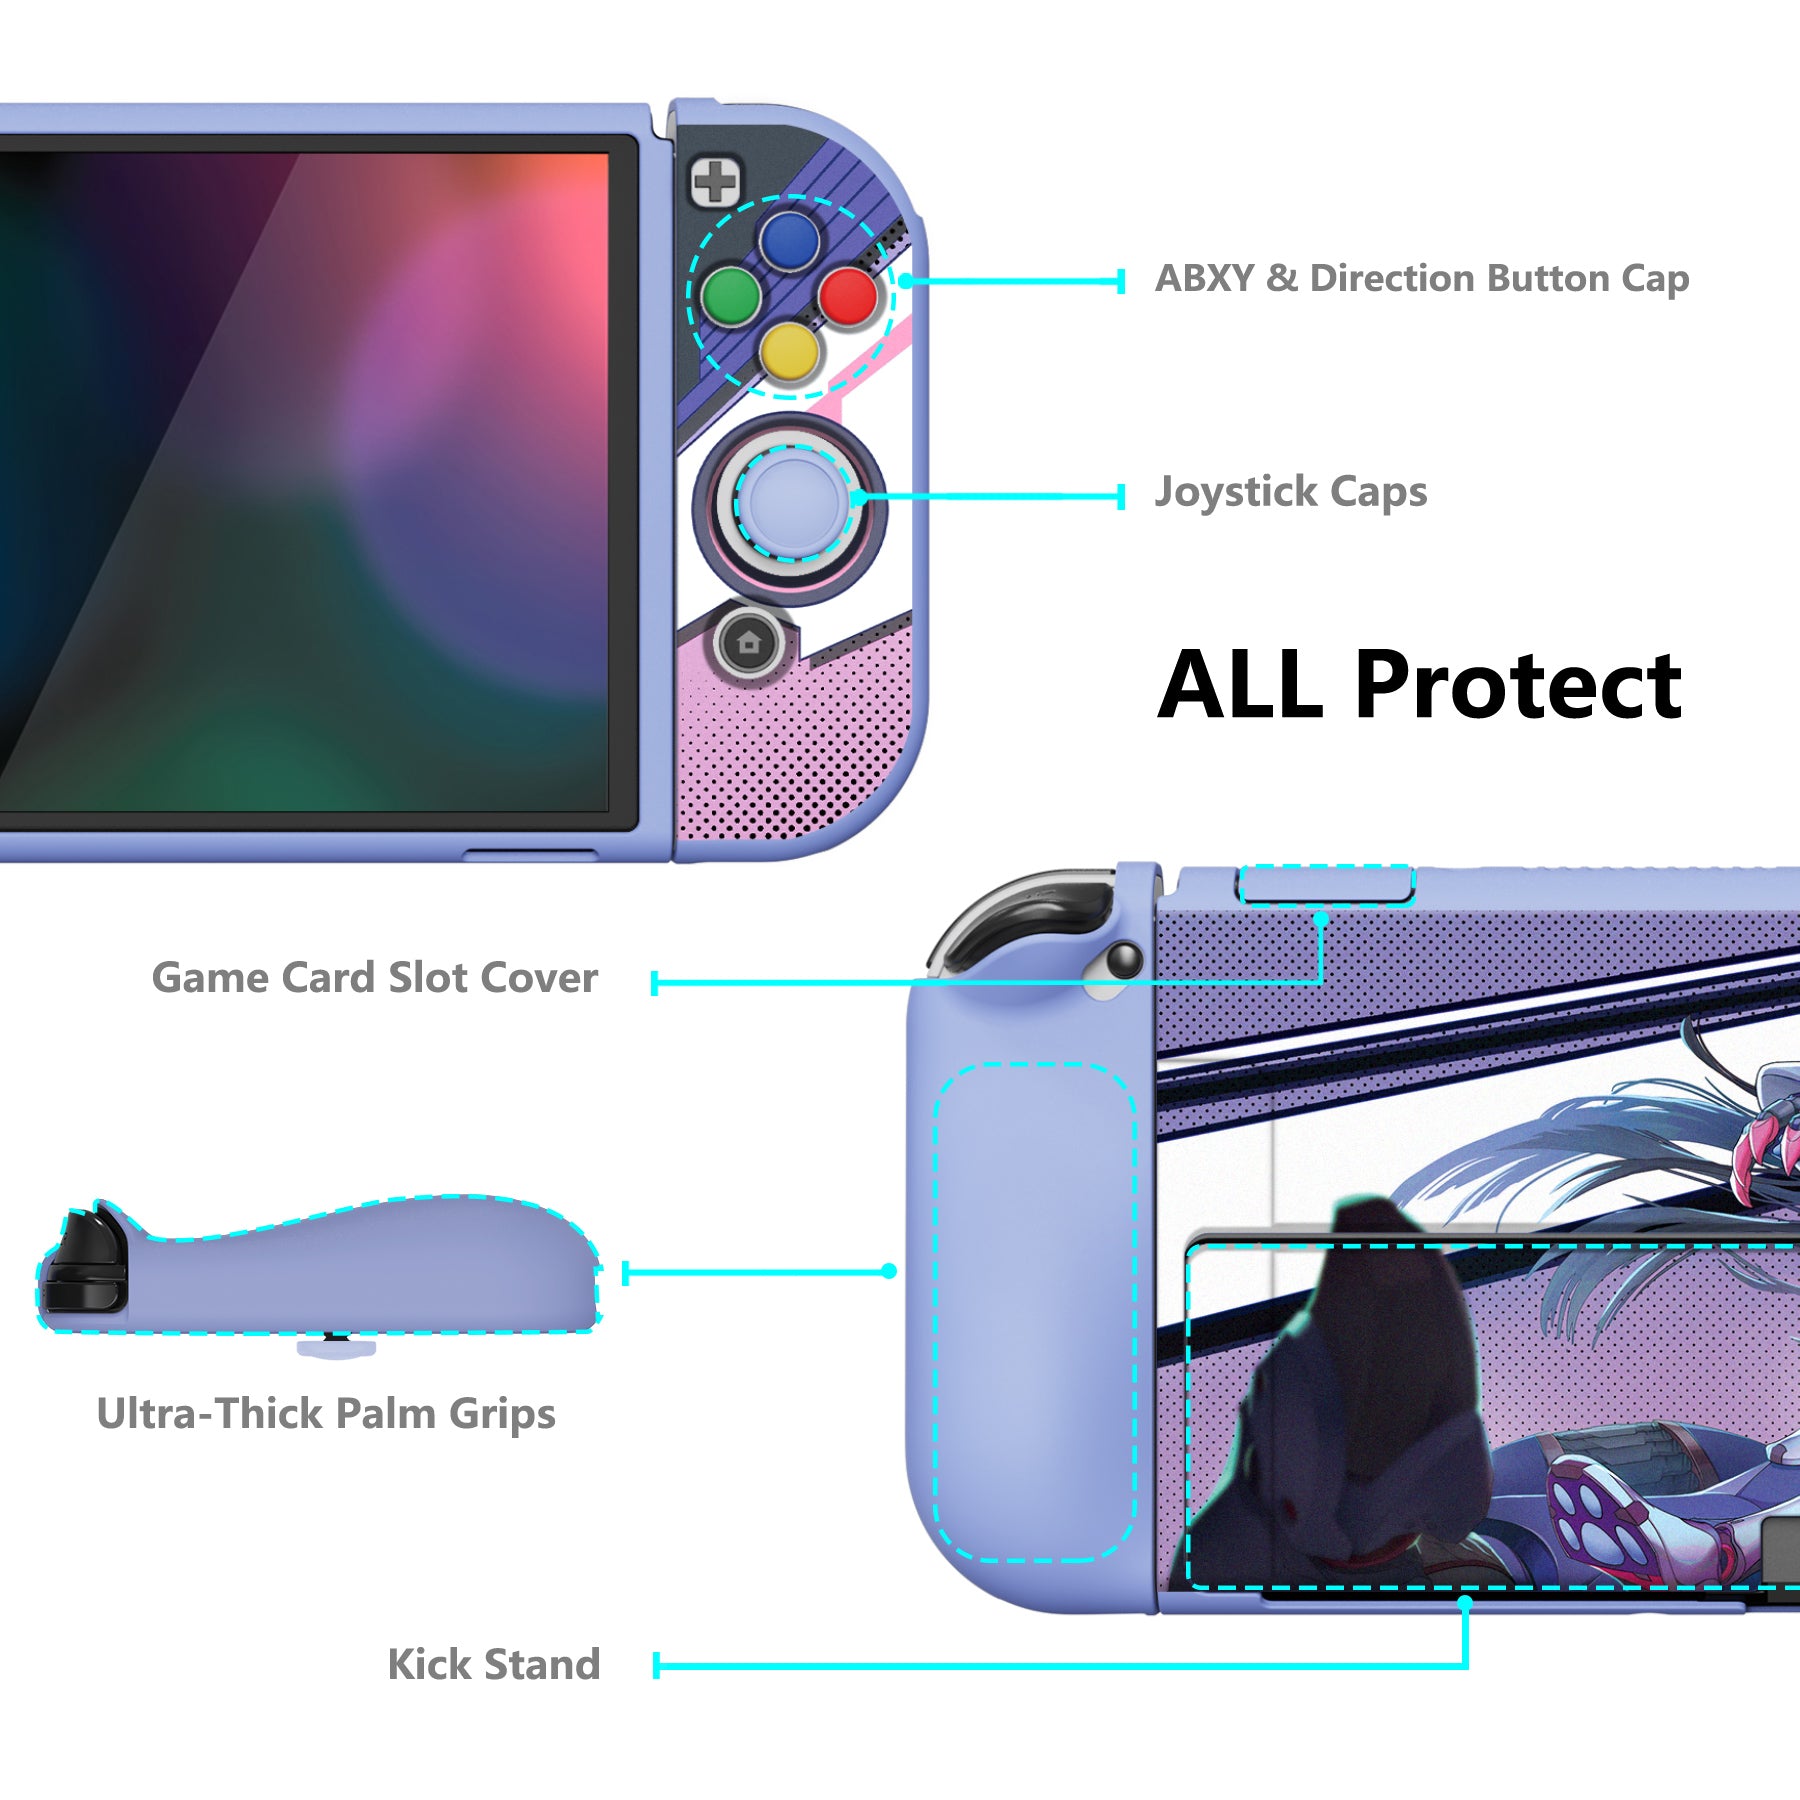 PlayVital ZealProtect Soft Protective Case for Switch OLED, Flexible Protector Joycon Grip Cover for Switch OLED with Thumb Grip Caps & ABXY Direction Button Caps - Neko Mecha - XSOYV6026 playvital